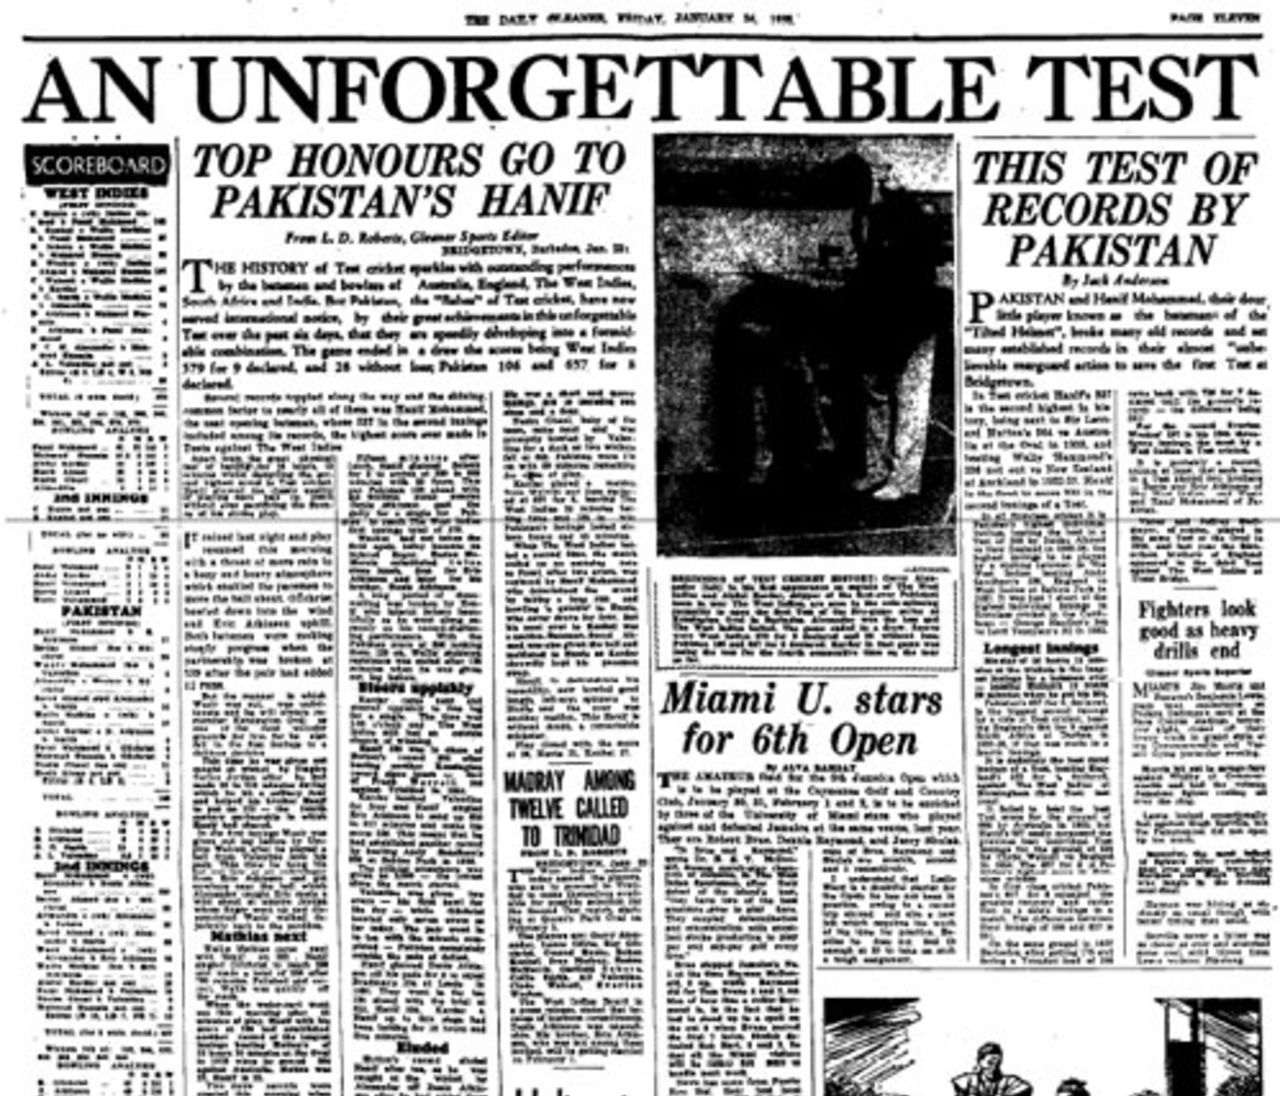 The <I>Gleaner</I> reports on Hanif Mohammad's 337, West Indies v Pakistan, 1st Test, Barbados, January 23, 1958